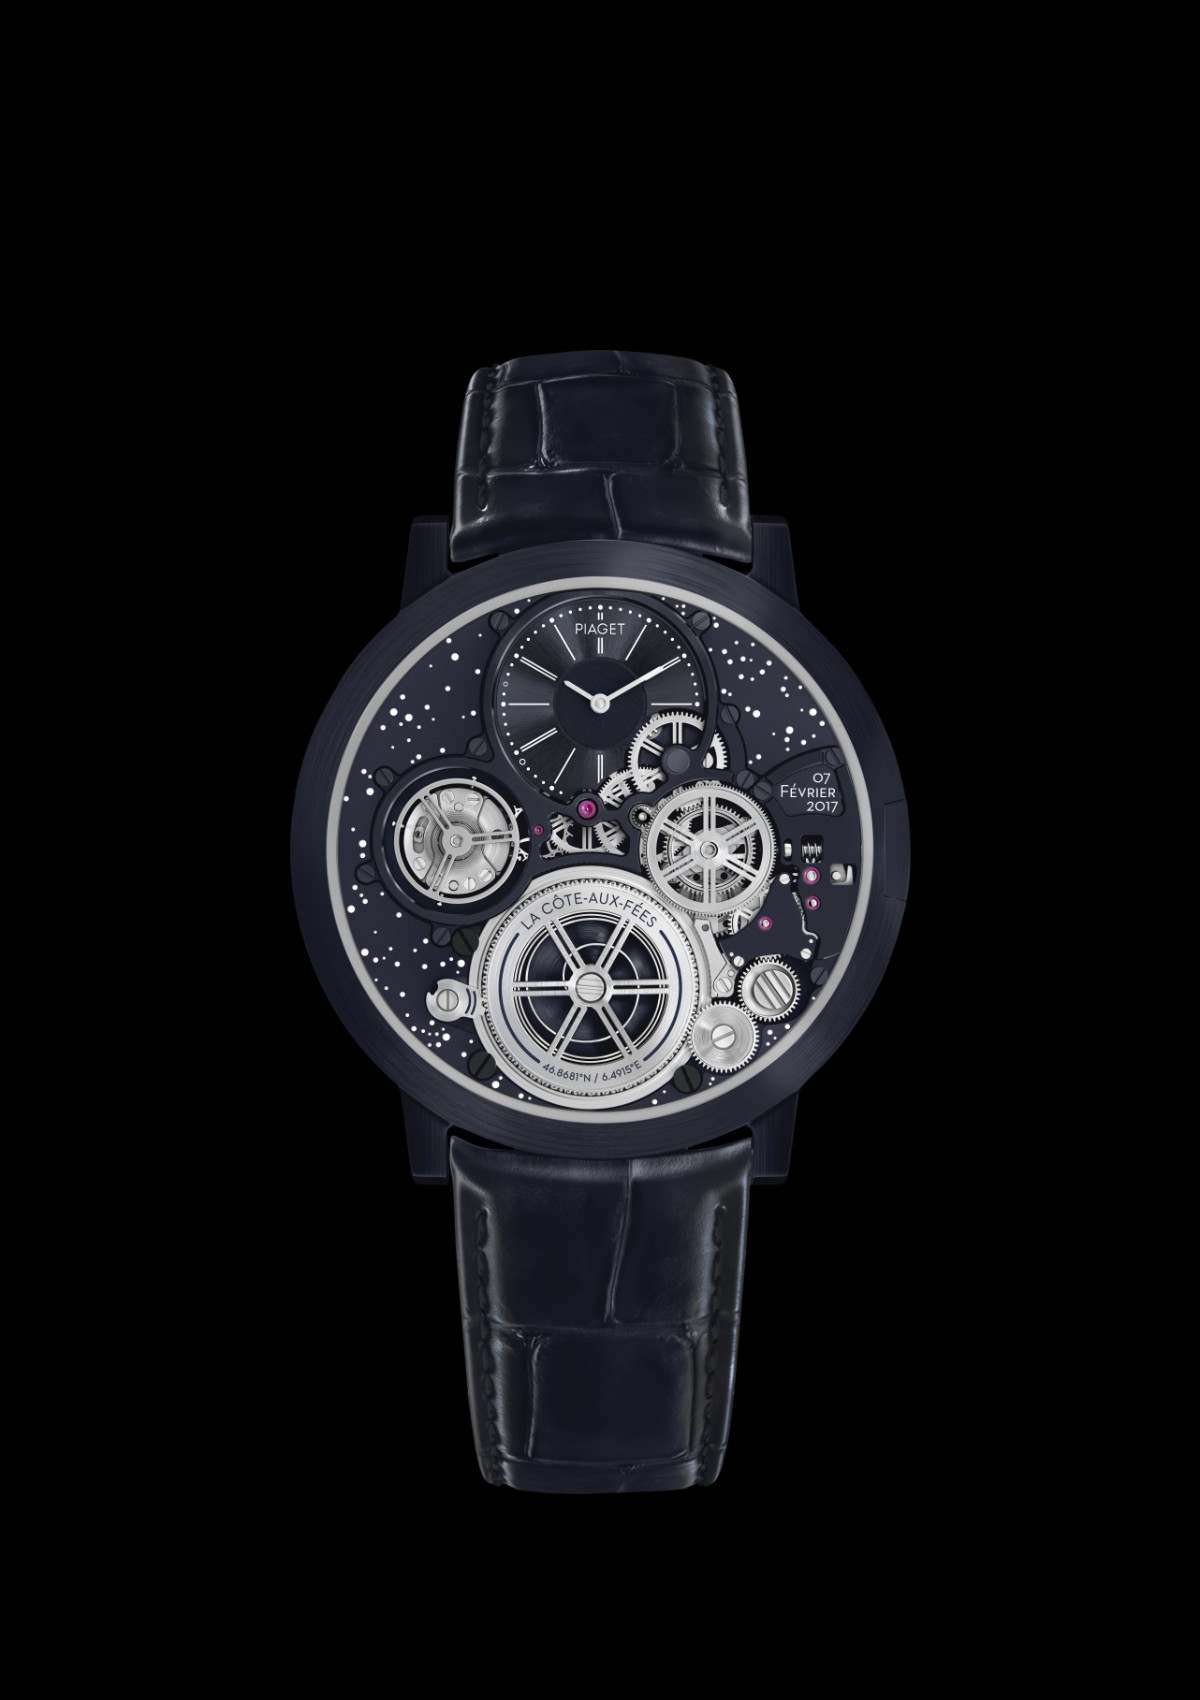 Piaget: A One-of-a-kind Tribute To The Altiplano Ultimate Concept